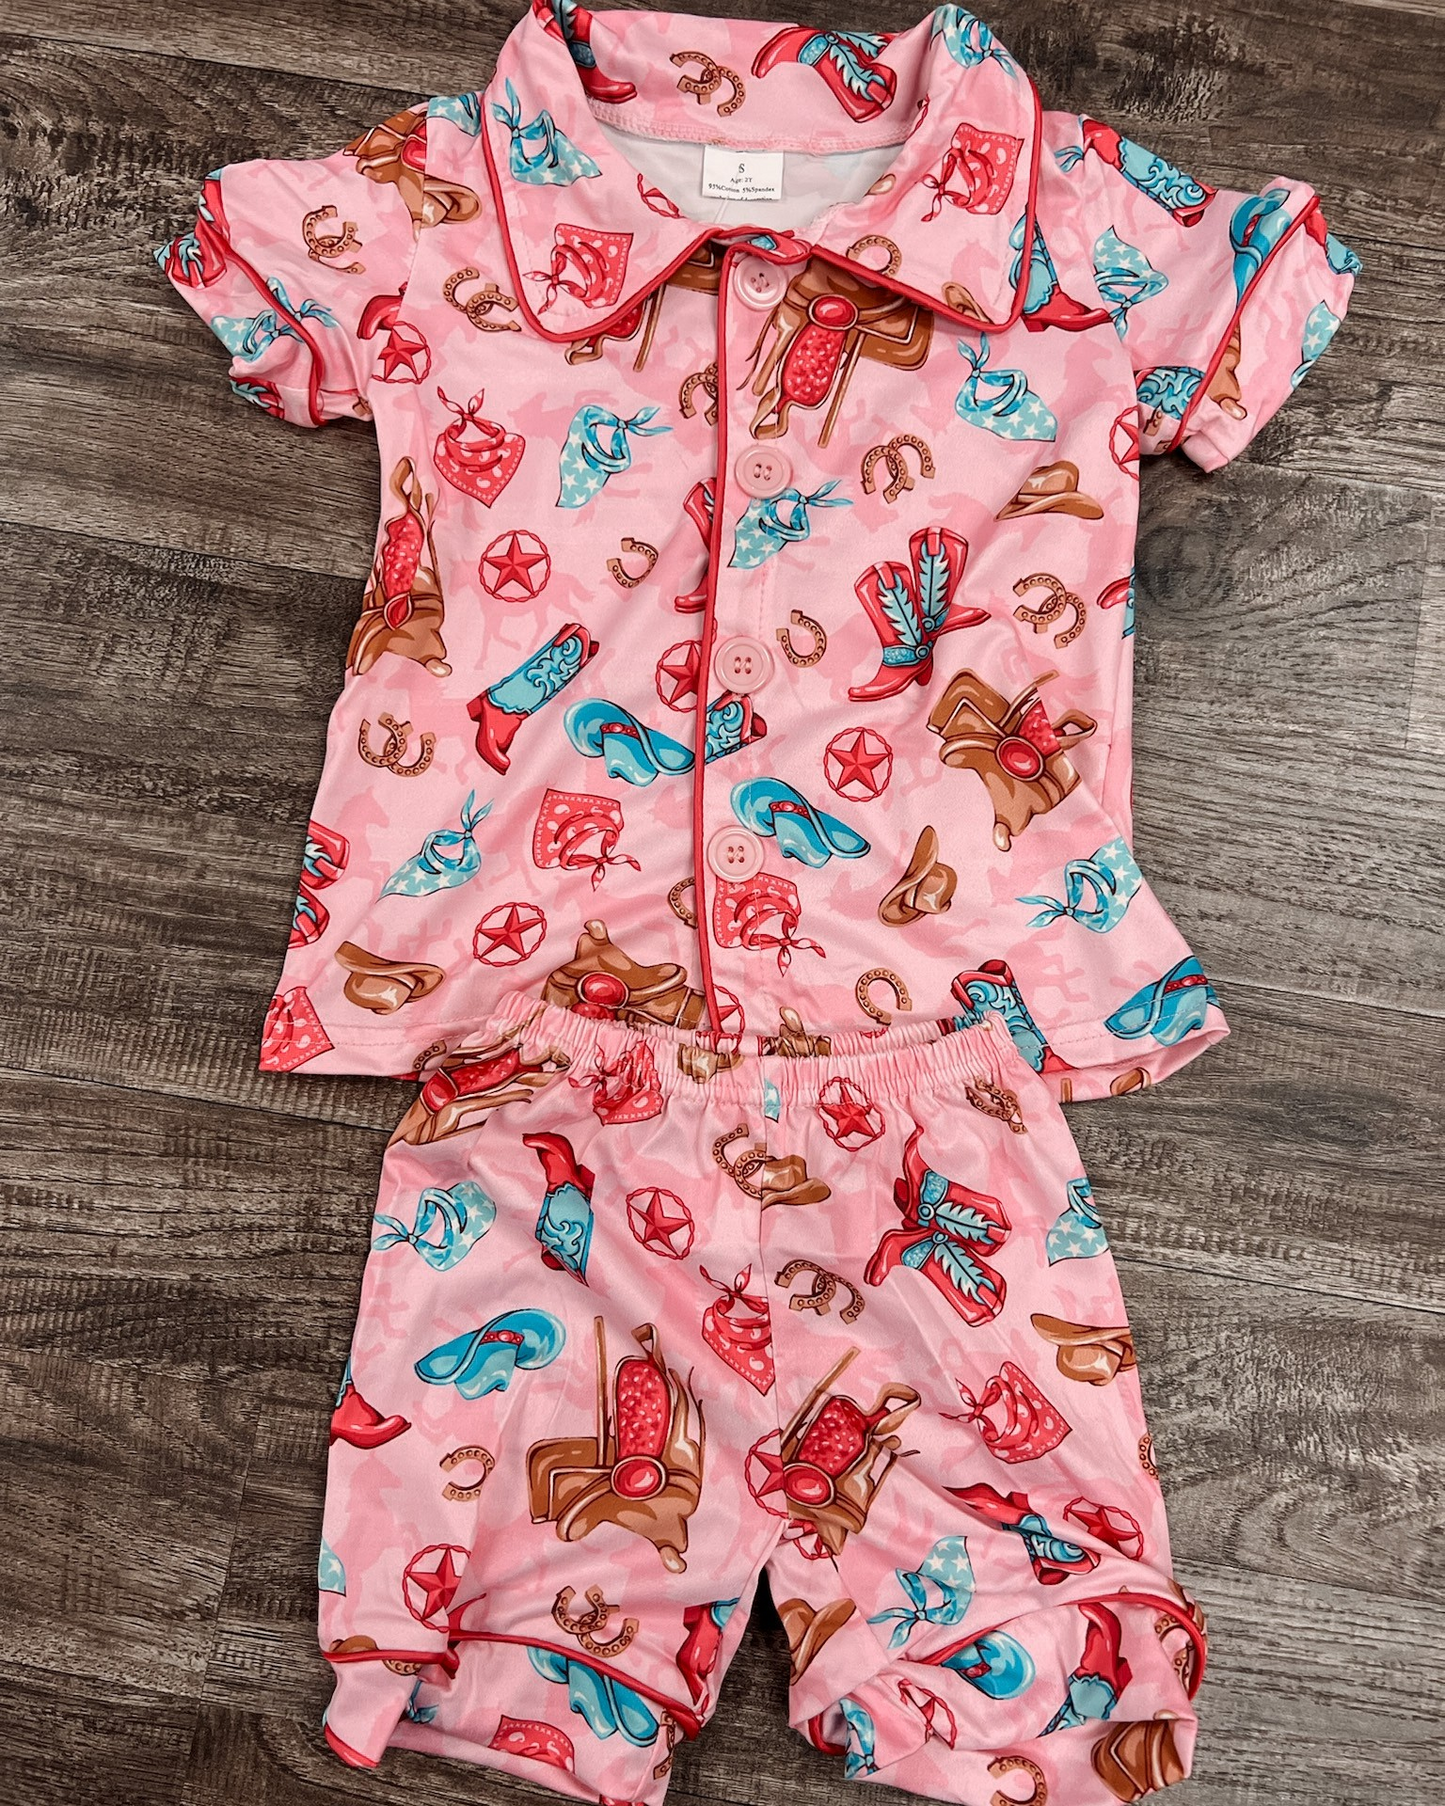 girl’s pajamas outfit pink cowgirl